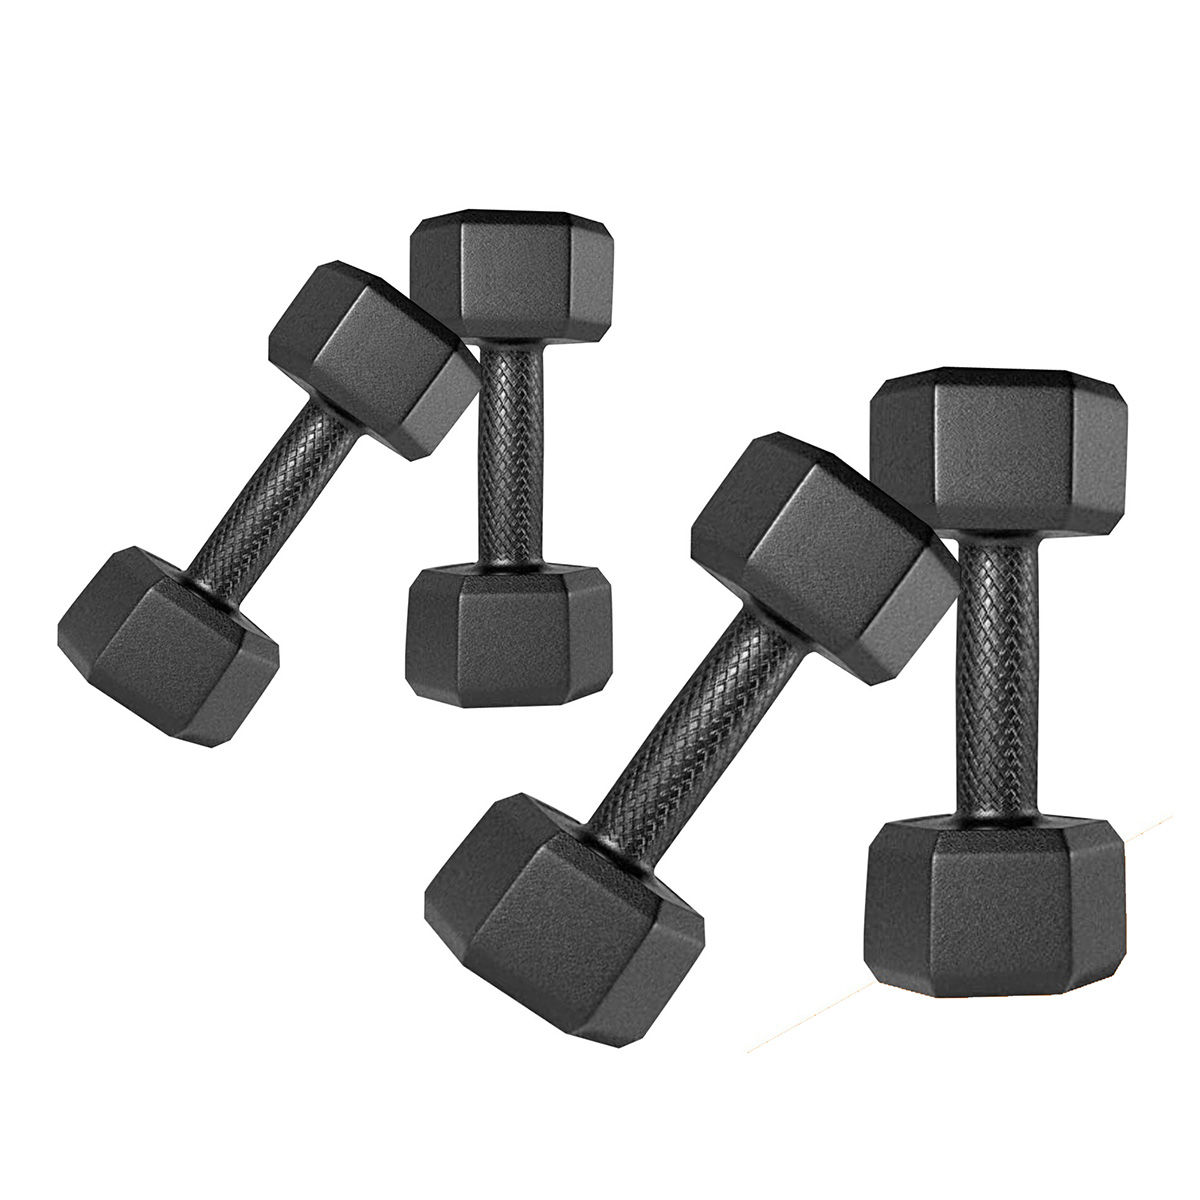 Fitzon PVC Hexa DM-2KG and 4KG Combo 161 Dumbbells and Fitness Kit Whole Body Workout (Set of 2)